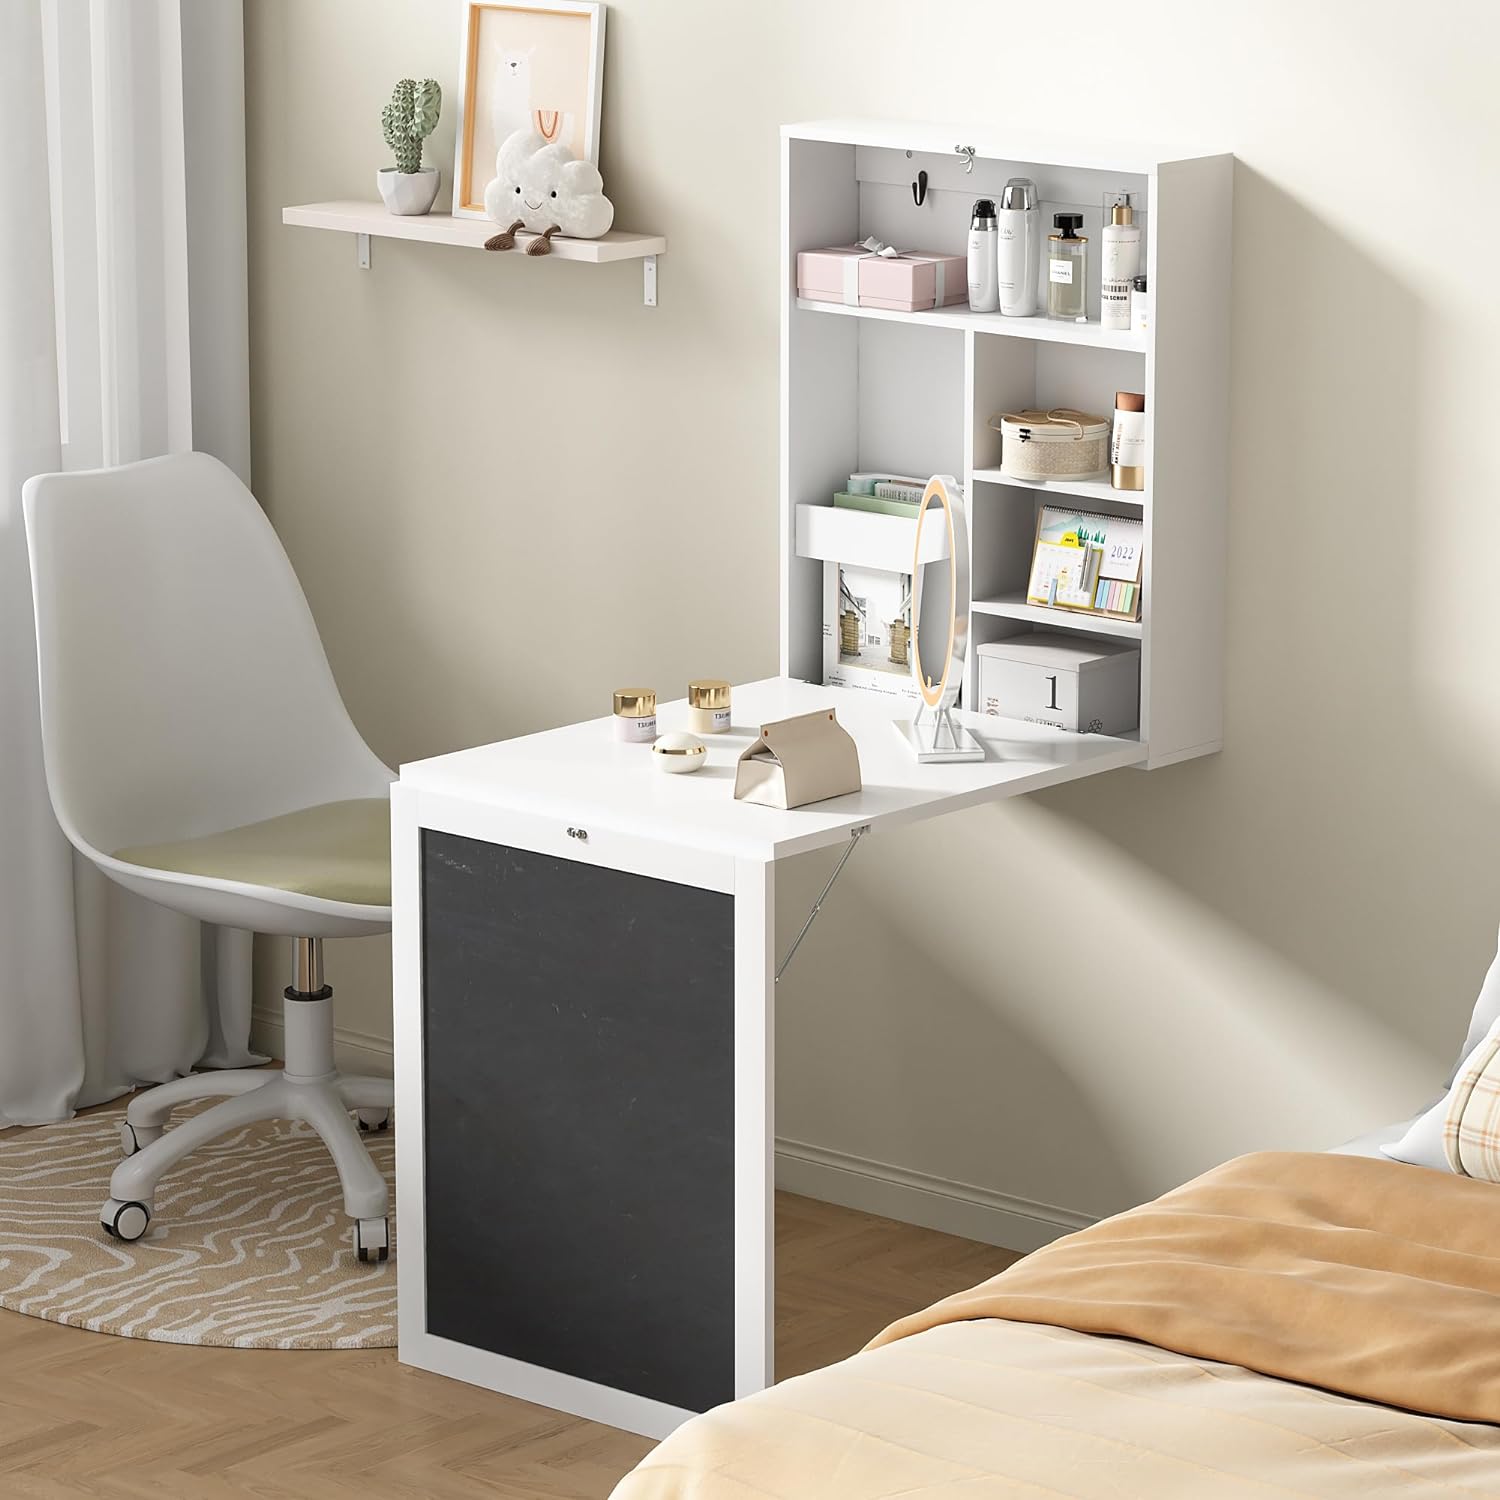 JAXPETY Wall Mounted Fold Out Desk with Storage Shelves